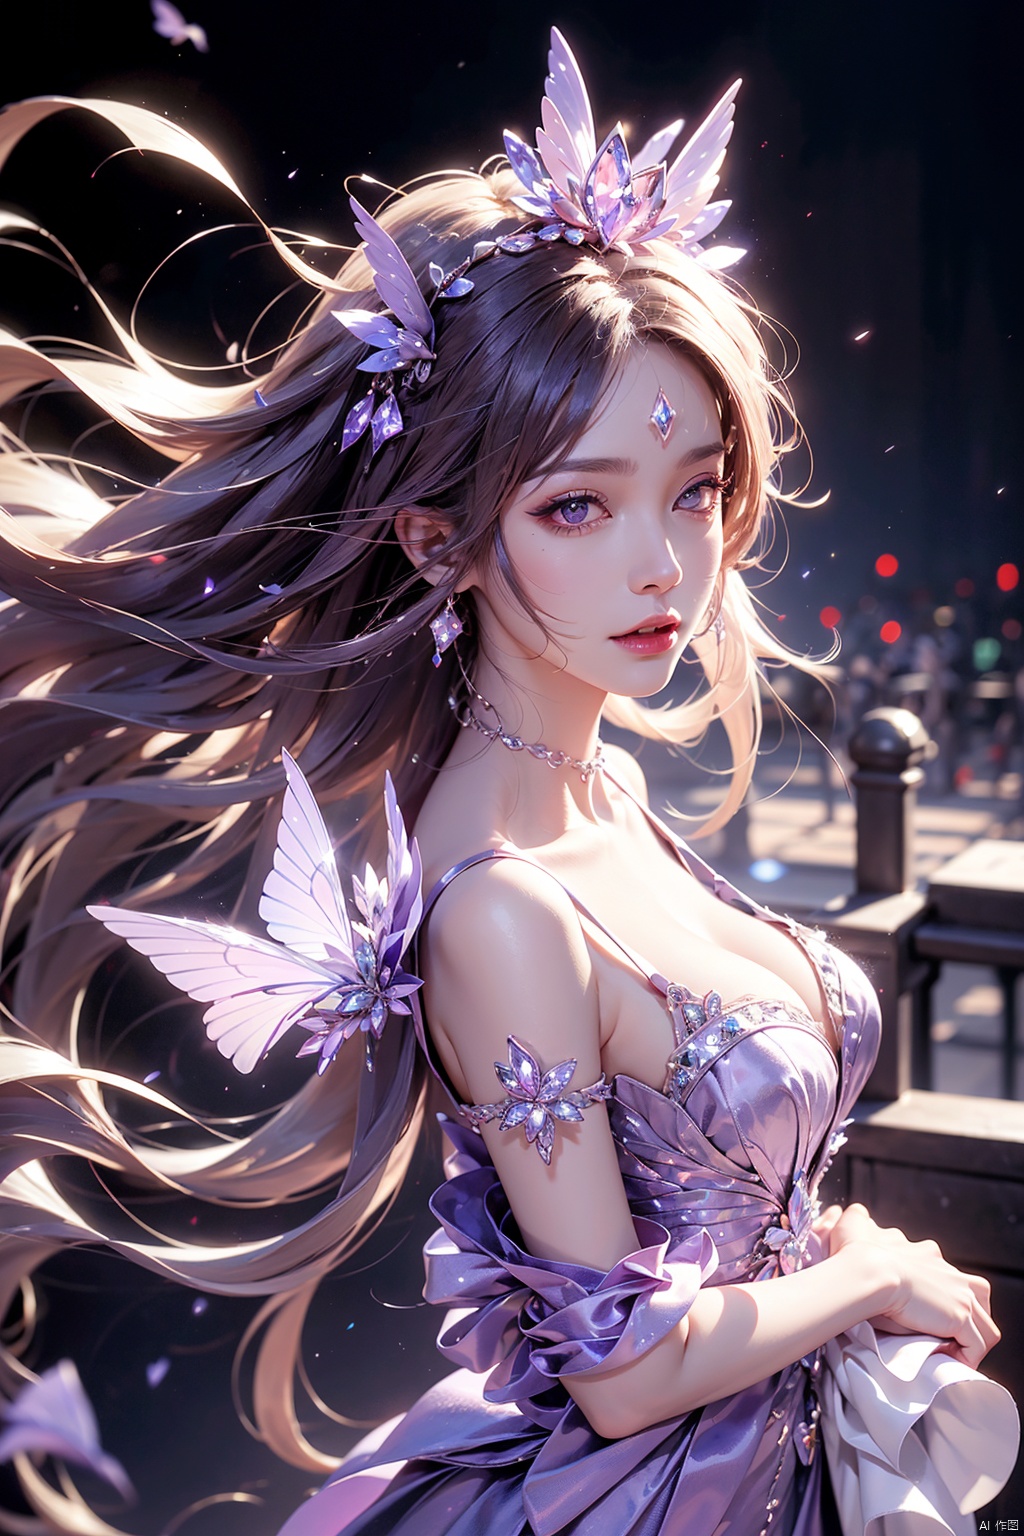  (aerial view,view of city),1girl flying in air,beautiful cute crystal girl in 26 years old, wearing crystal wear, the crystal is evil, Purple and light purple glowing crystal, Purple white crystal hair, the power is every wear, she is evil but cute, the crystal is evil and glowing Purple and light purple colors, detailed evil eyes,she has a serious expression and her lips are closed glowing crystal wear, (incredible details, cinematic ultra wide angle, depth of failed, hyper detailed, insane details, hyper realistic, high resolution, cinematic lighting, soft lighting, incredible quality, dynamic shot,,Hair with scenery,baiyueguangya,huliya,glint sparkle,1 girl, subway, 1girl,high_heels